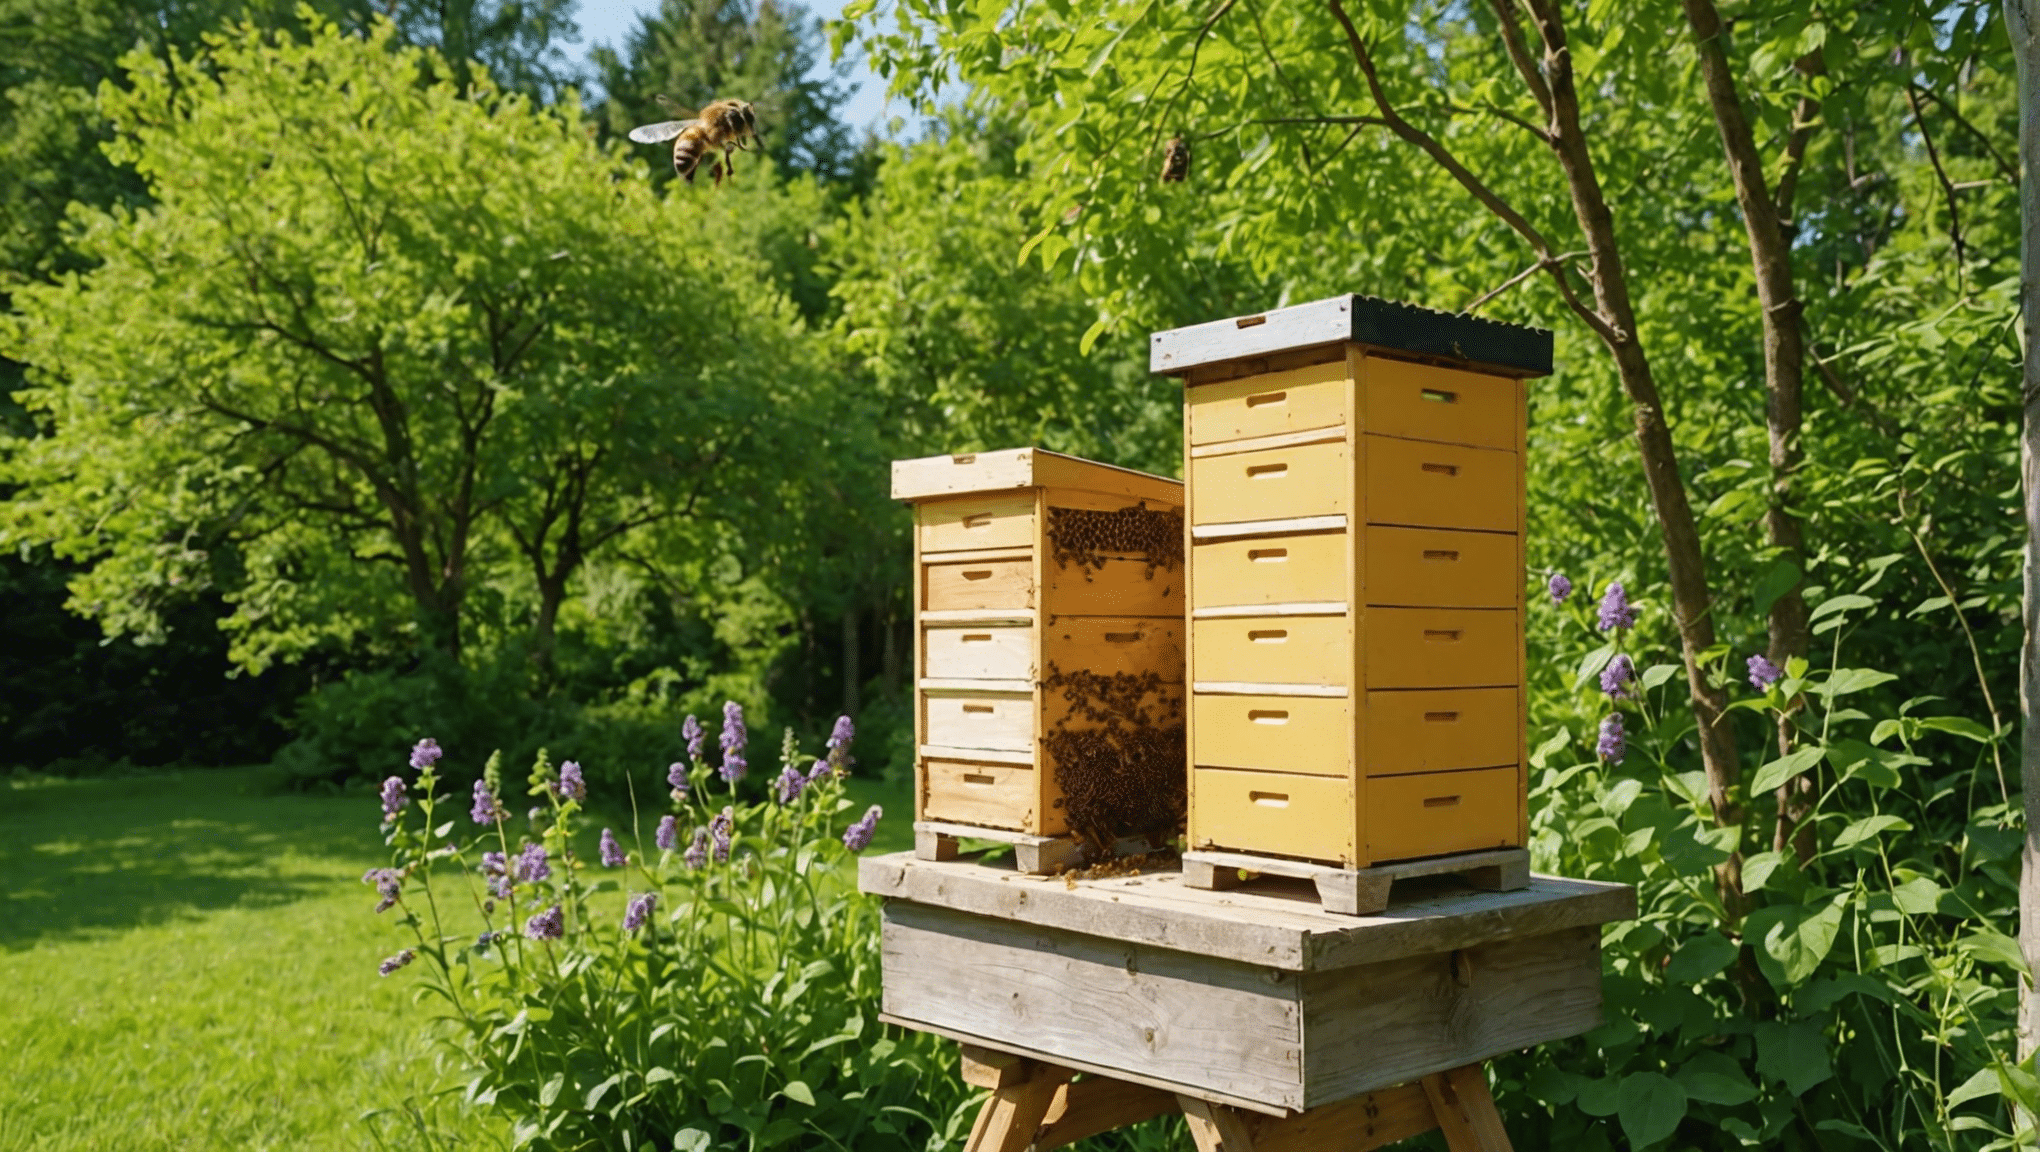 find all you need to know about natural honey bee hives, including how they are made, their benefits, and how to care for them in this comprehensive guide.